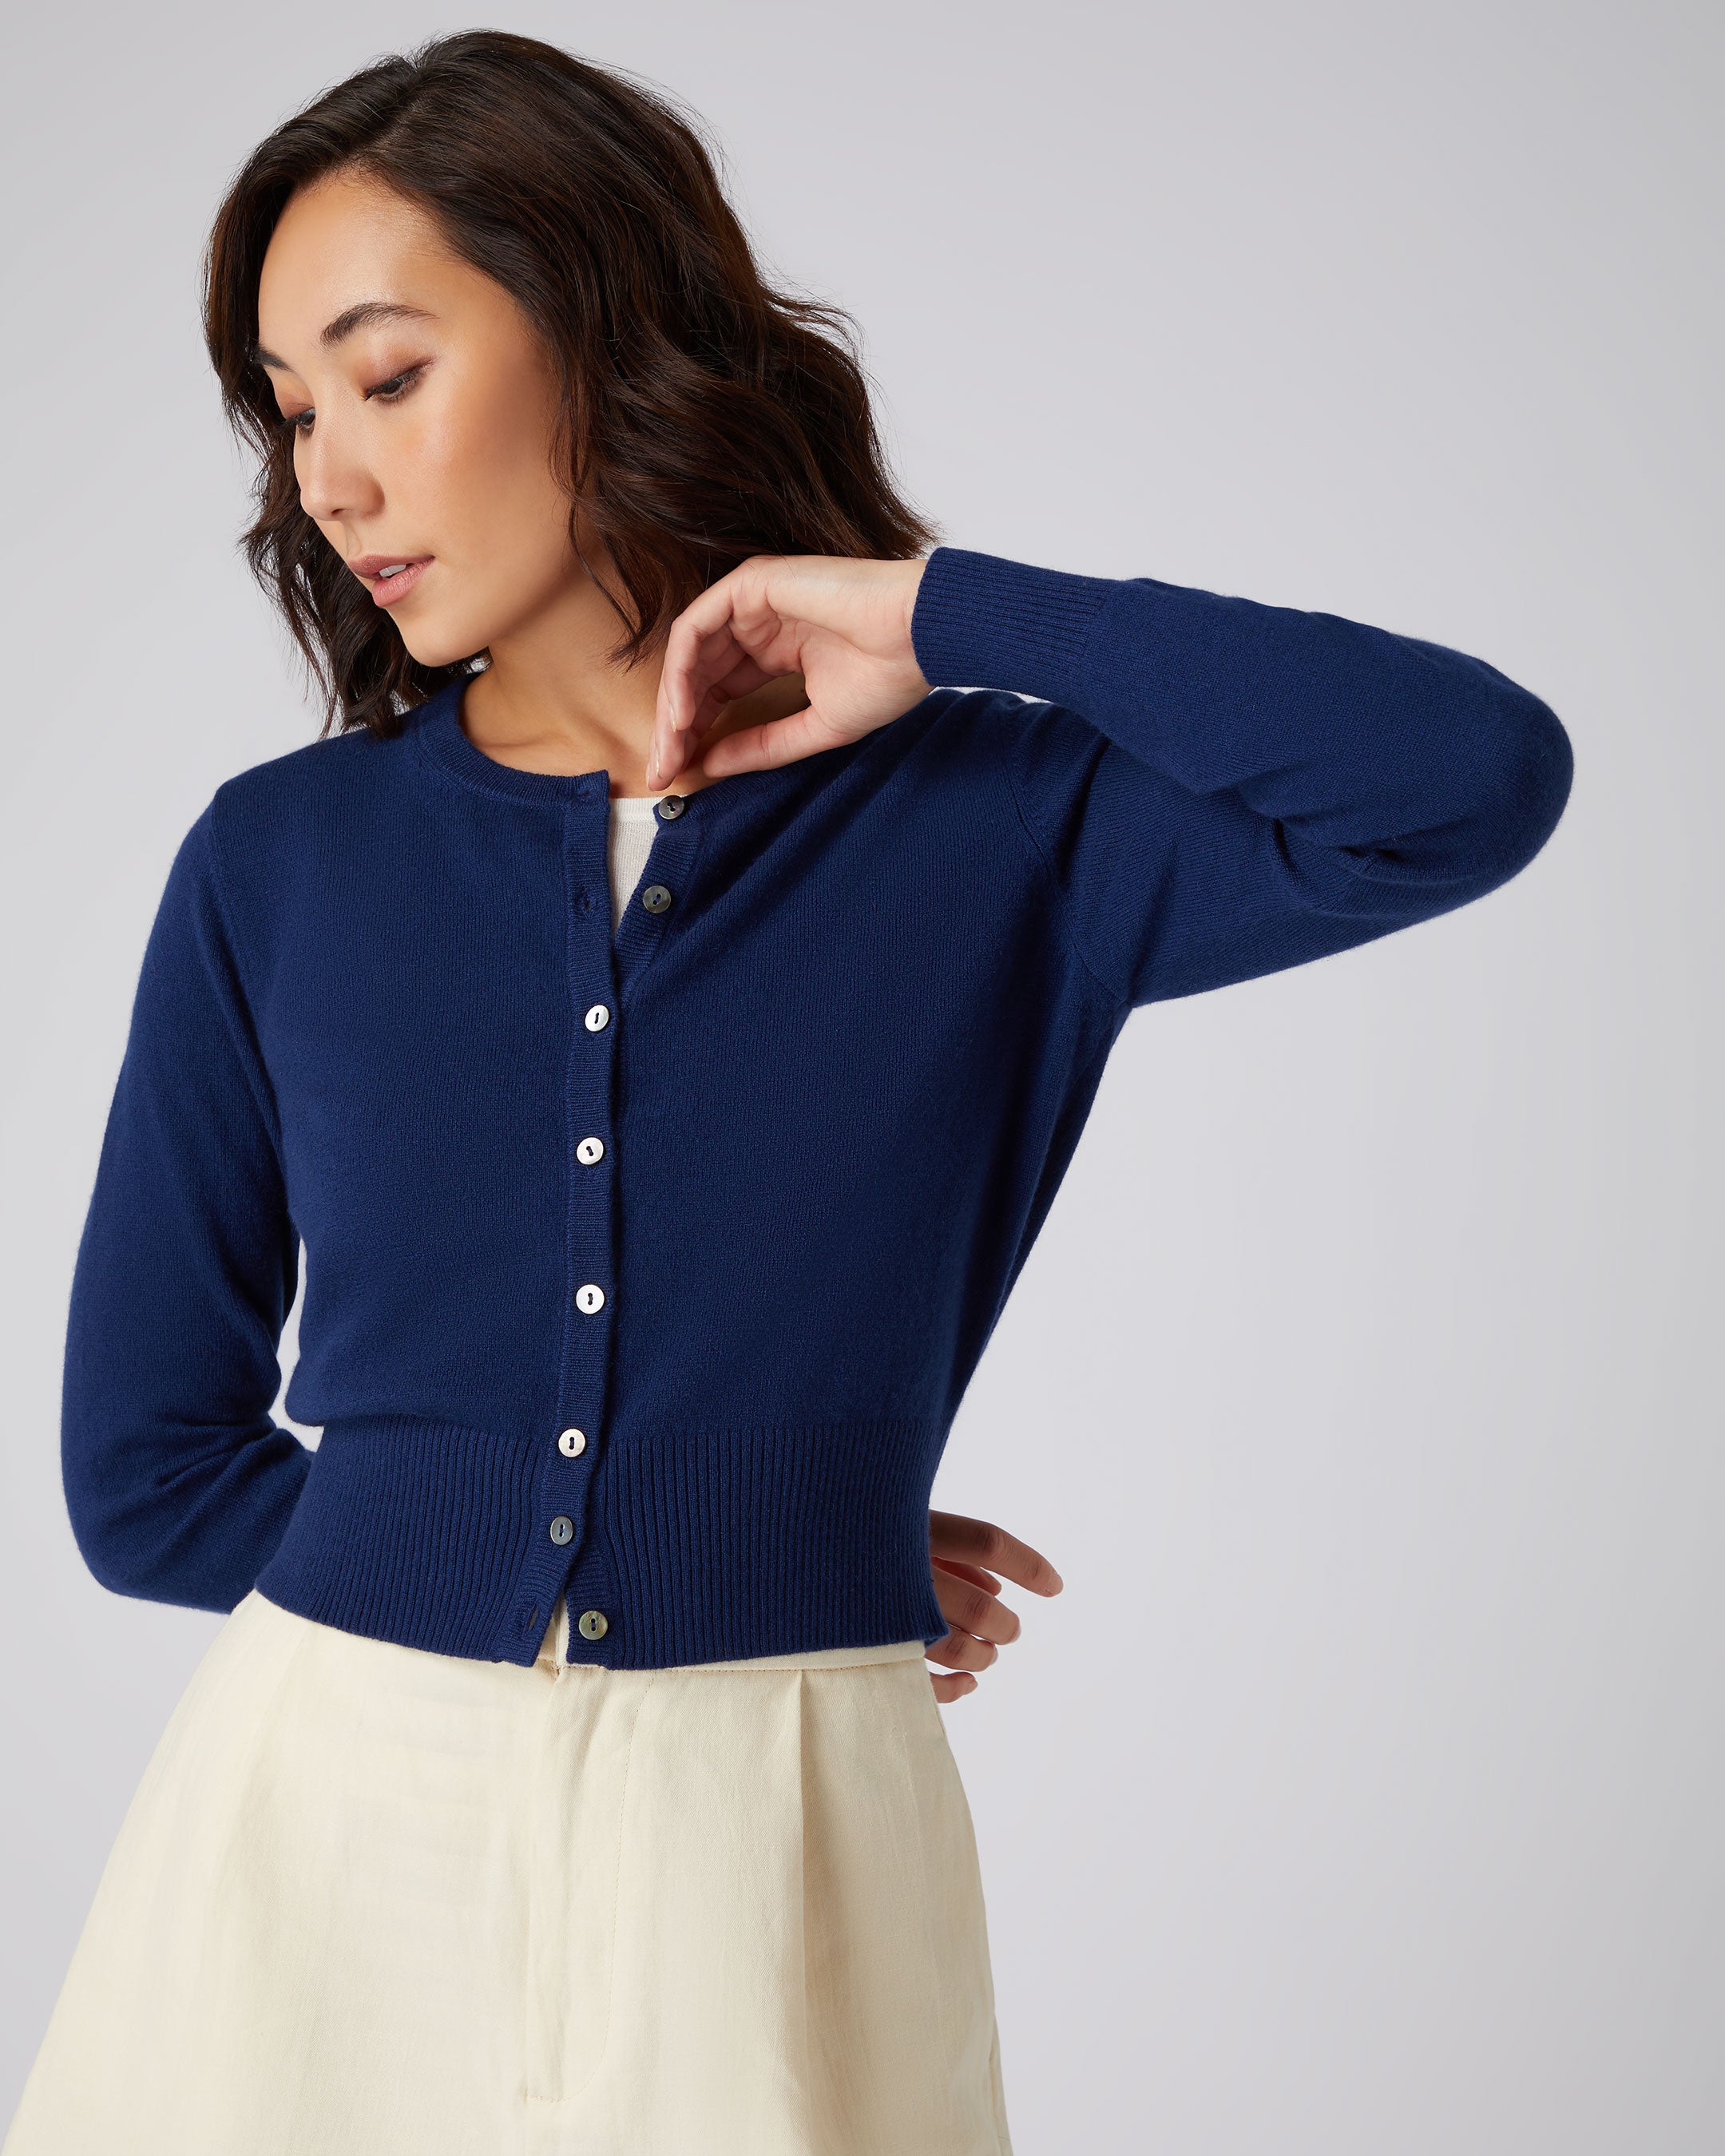 N.Peal belted-waist cashmere cardigan - Blue